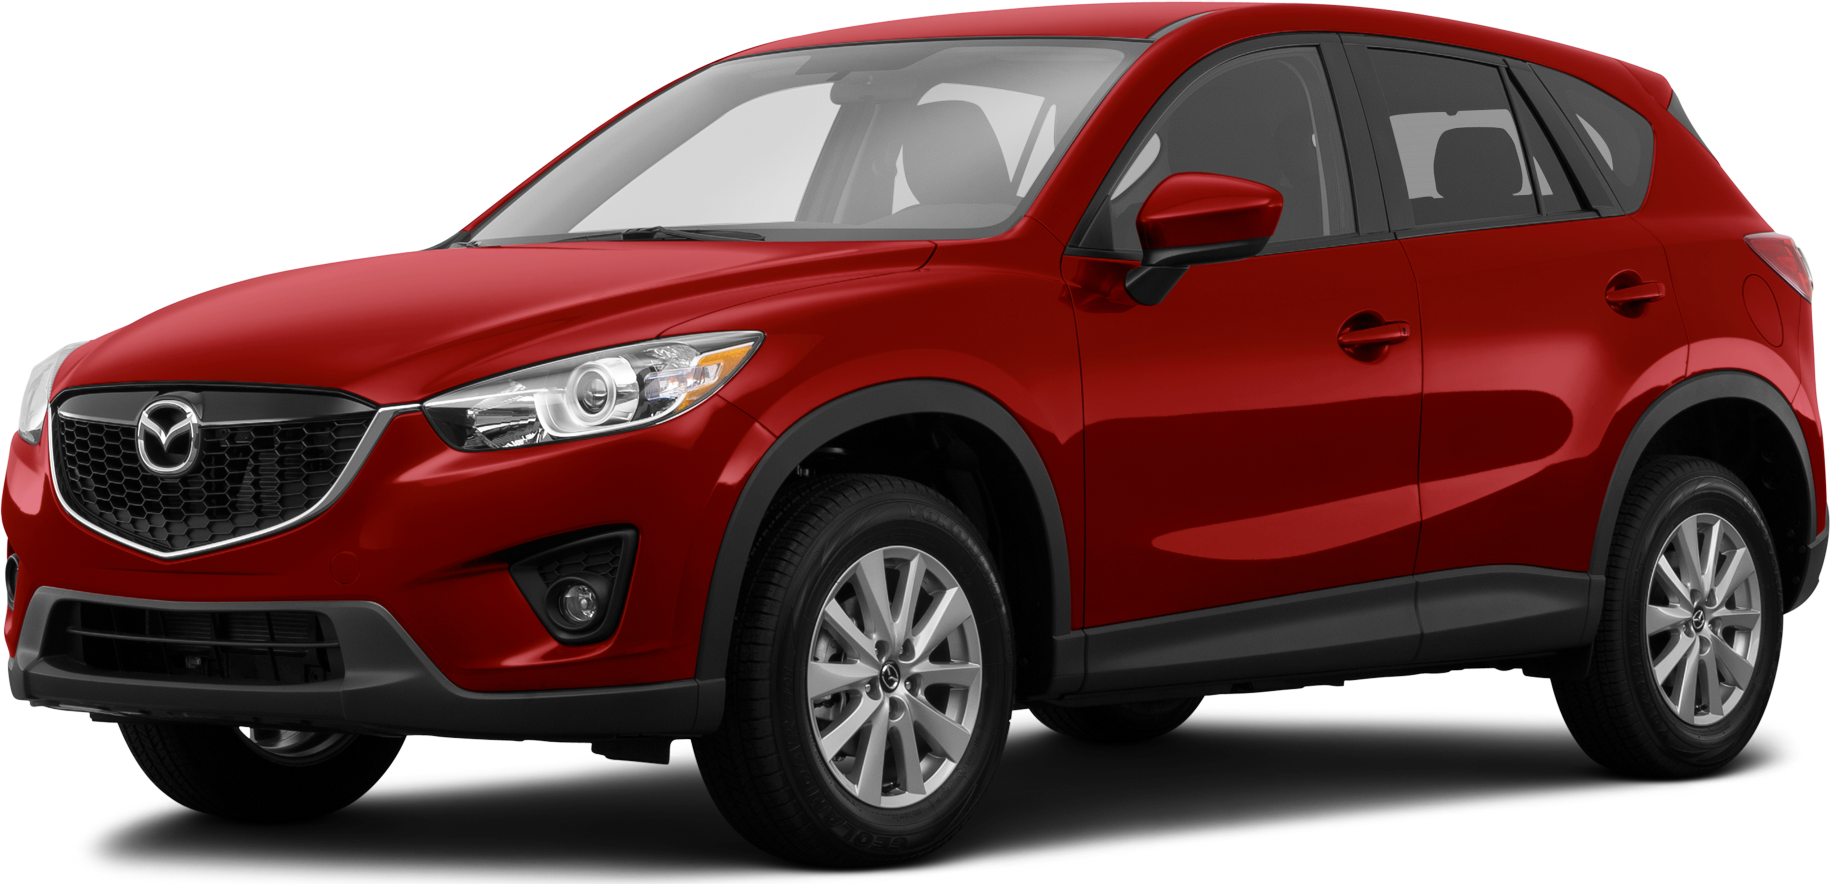 2014 Mazda Cx 5 Price Value Ratings And Reviews Kelley Blue Book